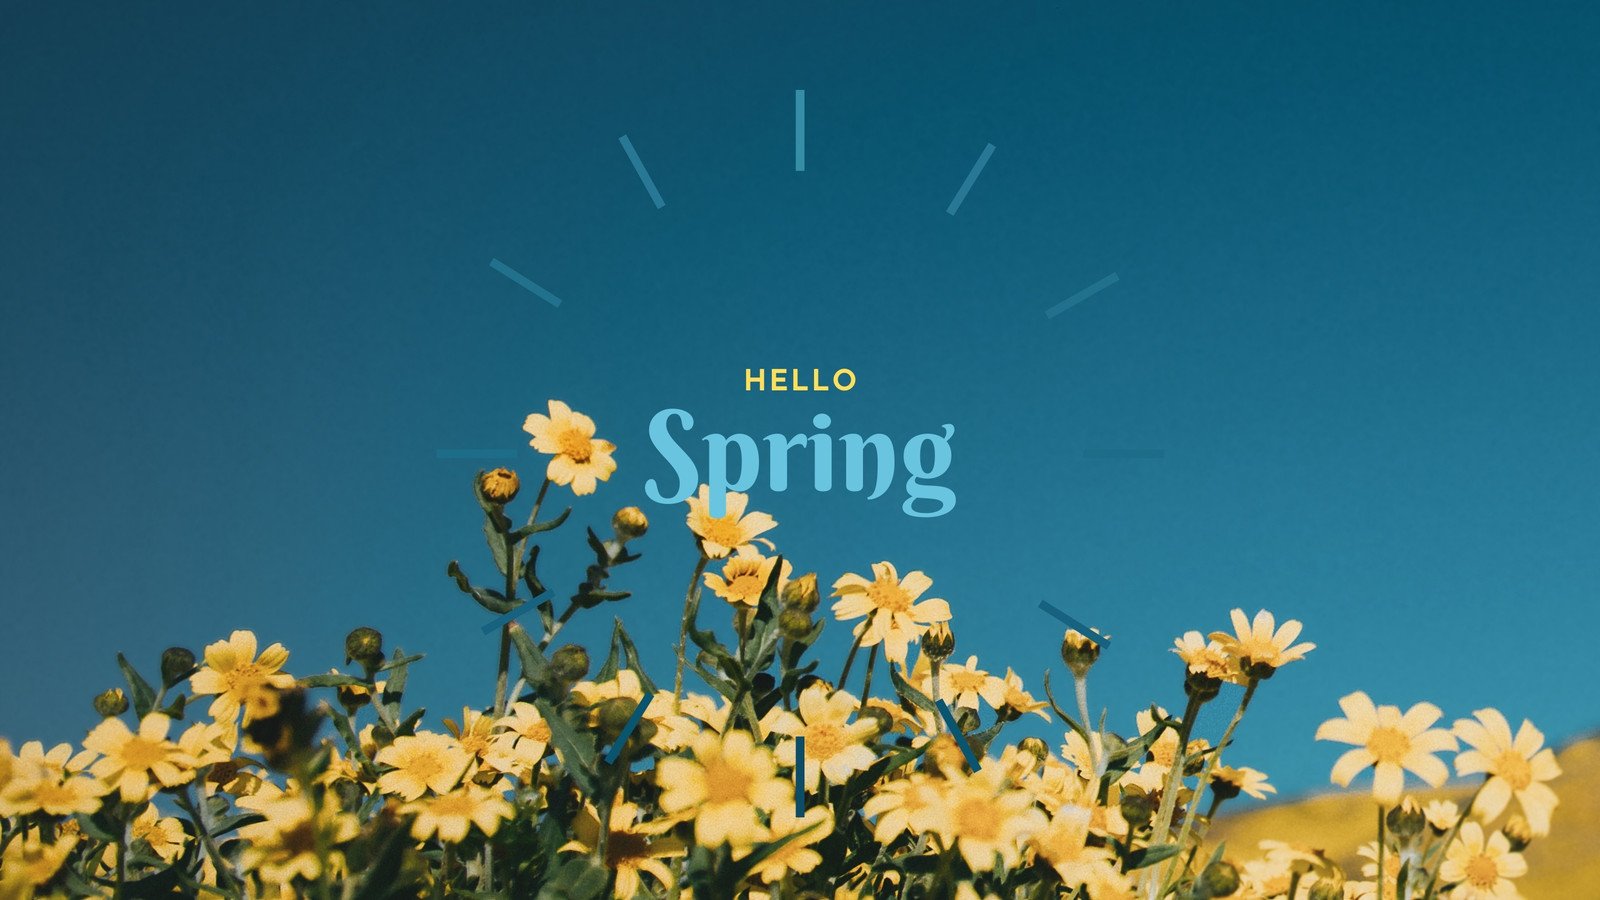 Free and customizable spring desktop wallpapers templates